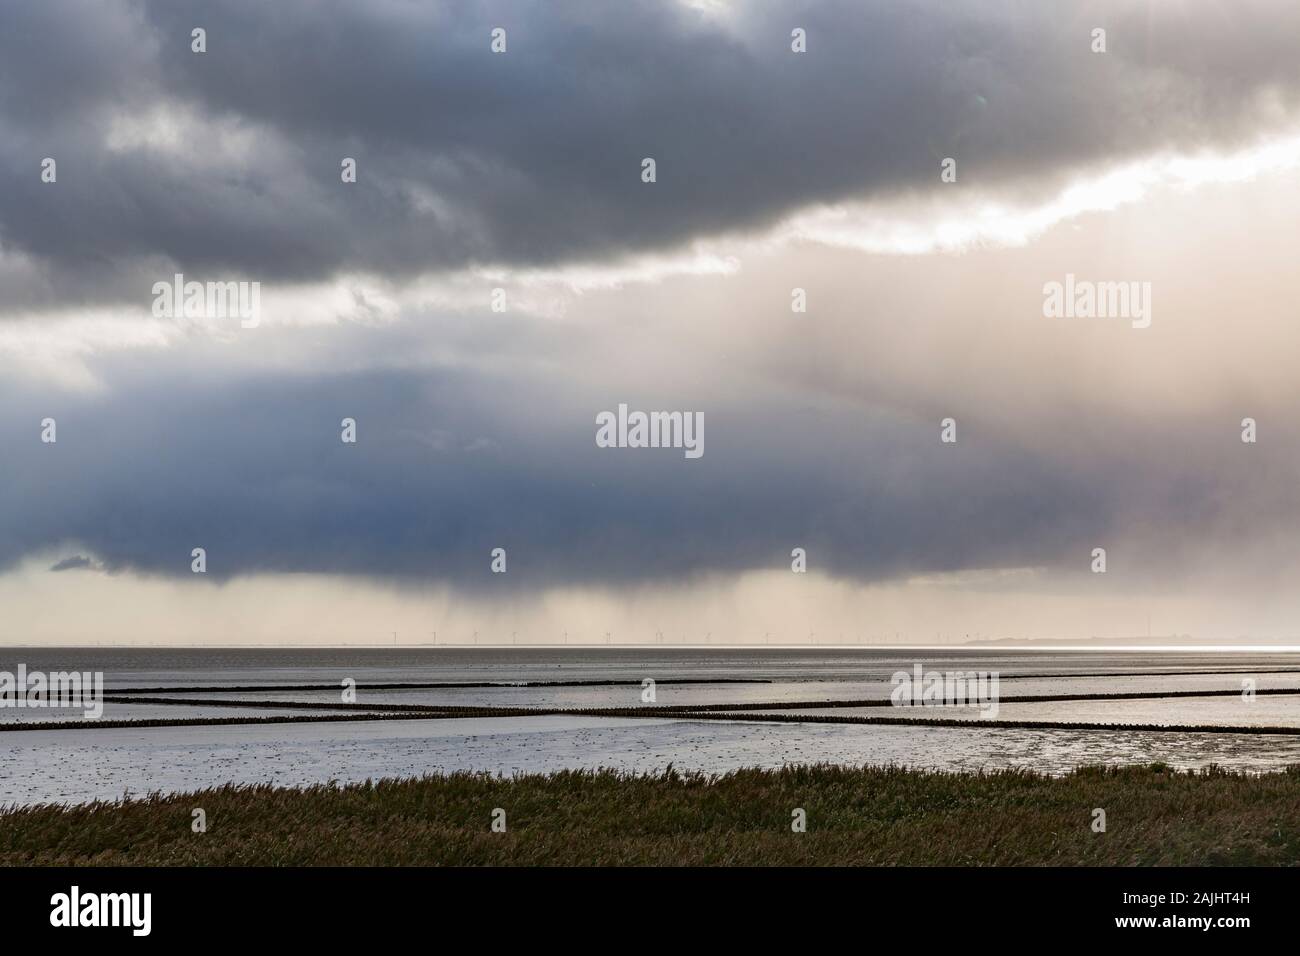 Wattenmeer, Ebbe, Keitum, Sylt Stock Photo